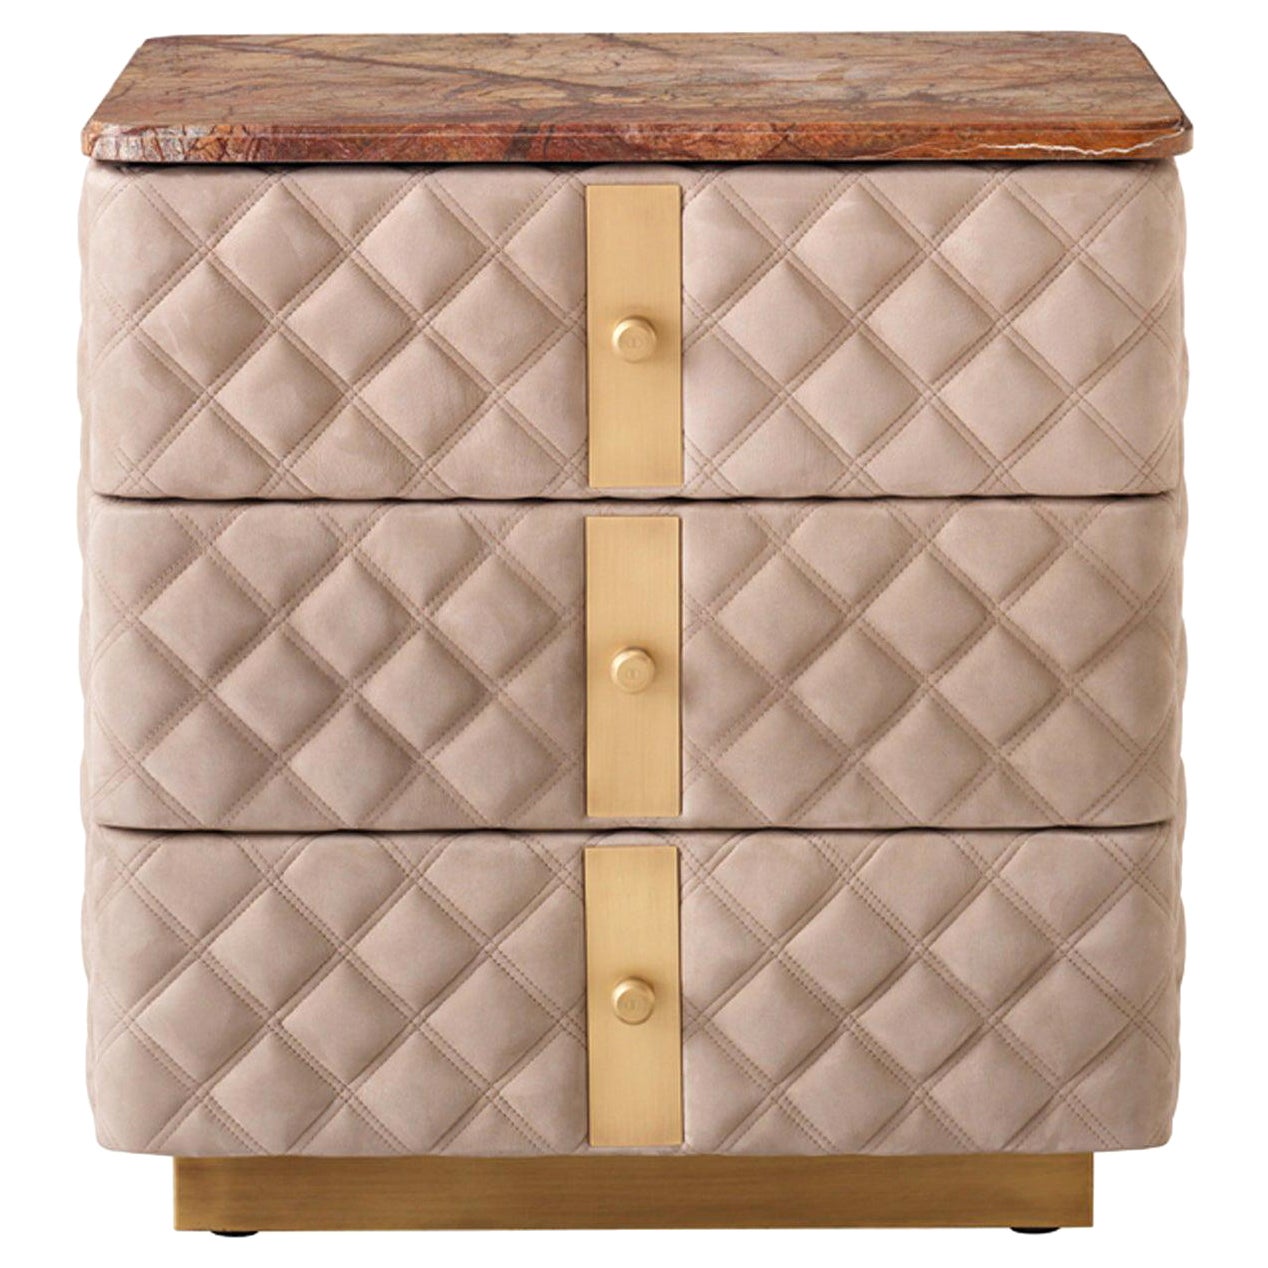 Alfred 3-Drawer Nightstand by Daytona For Sale